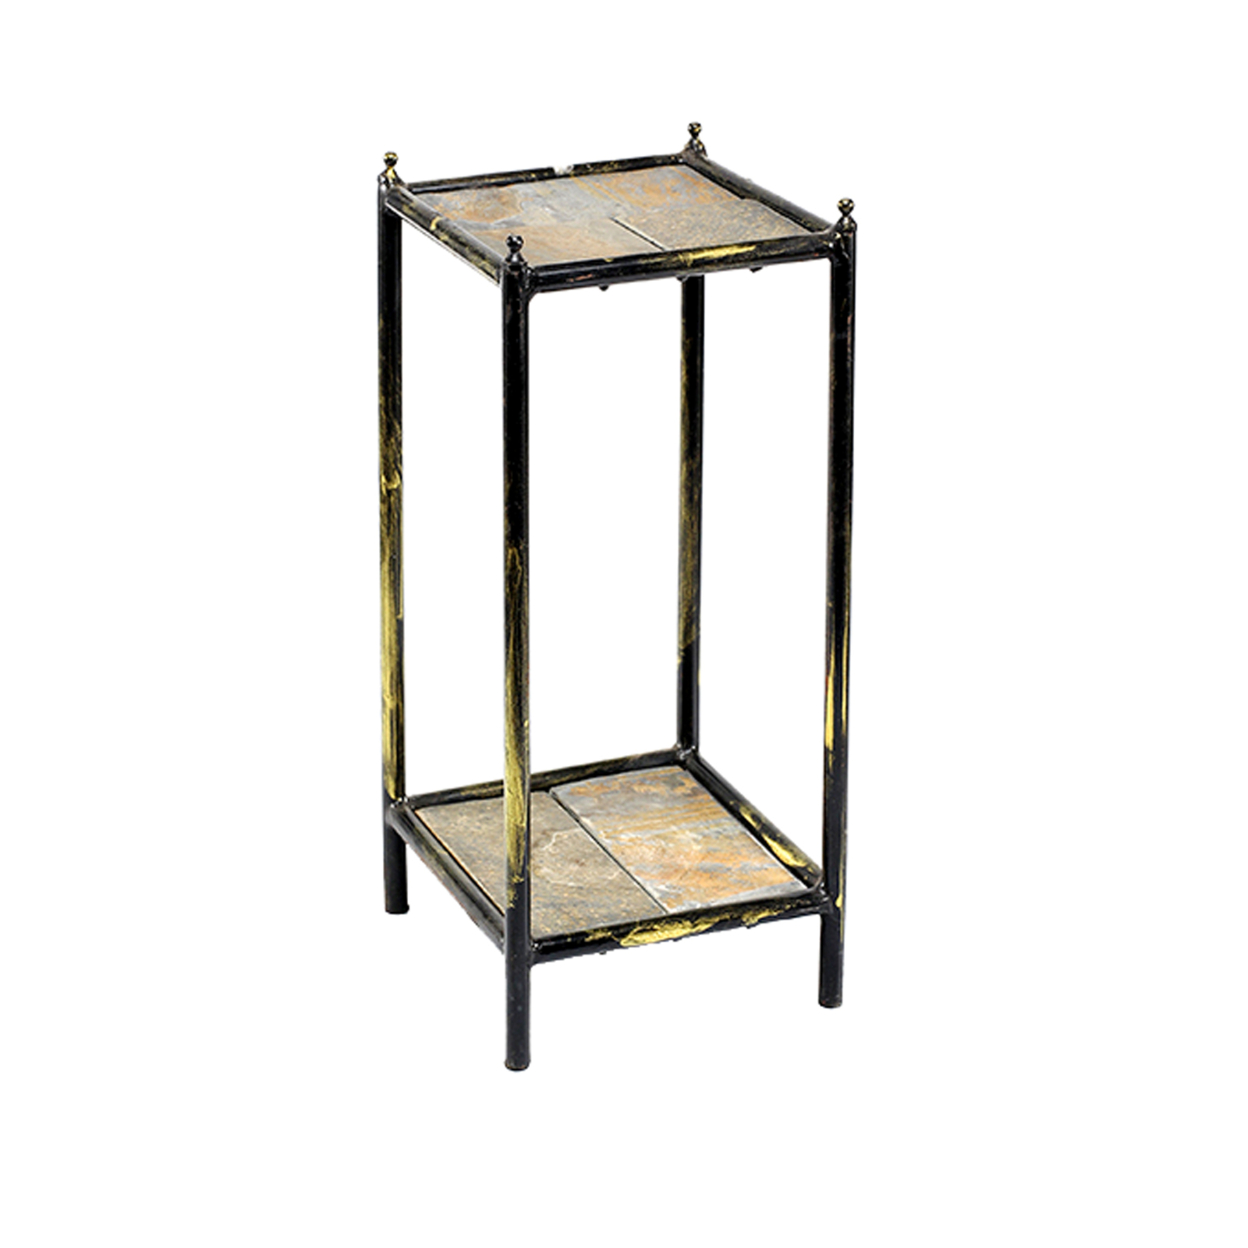 2 Tier Square Stone Top Plant Stand With Metal Frame, Small, Black And Gray- Saltoro Sherpi